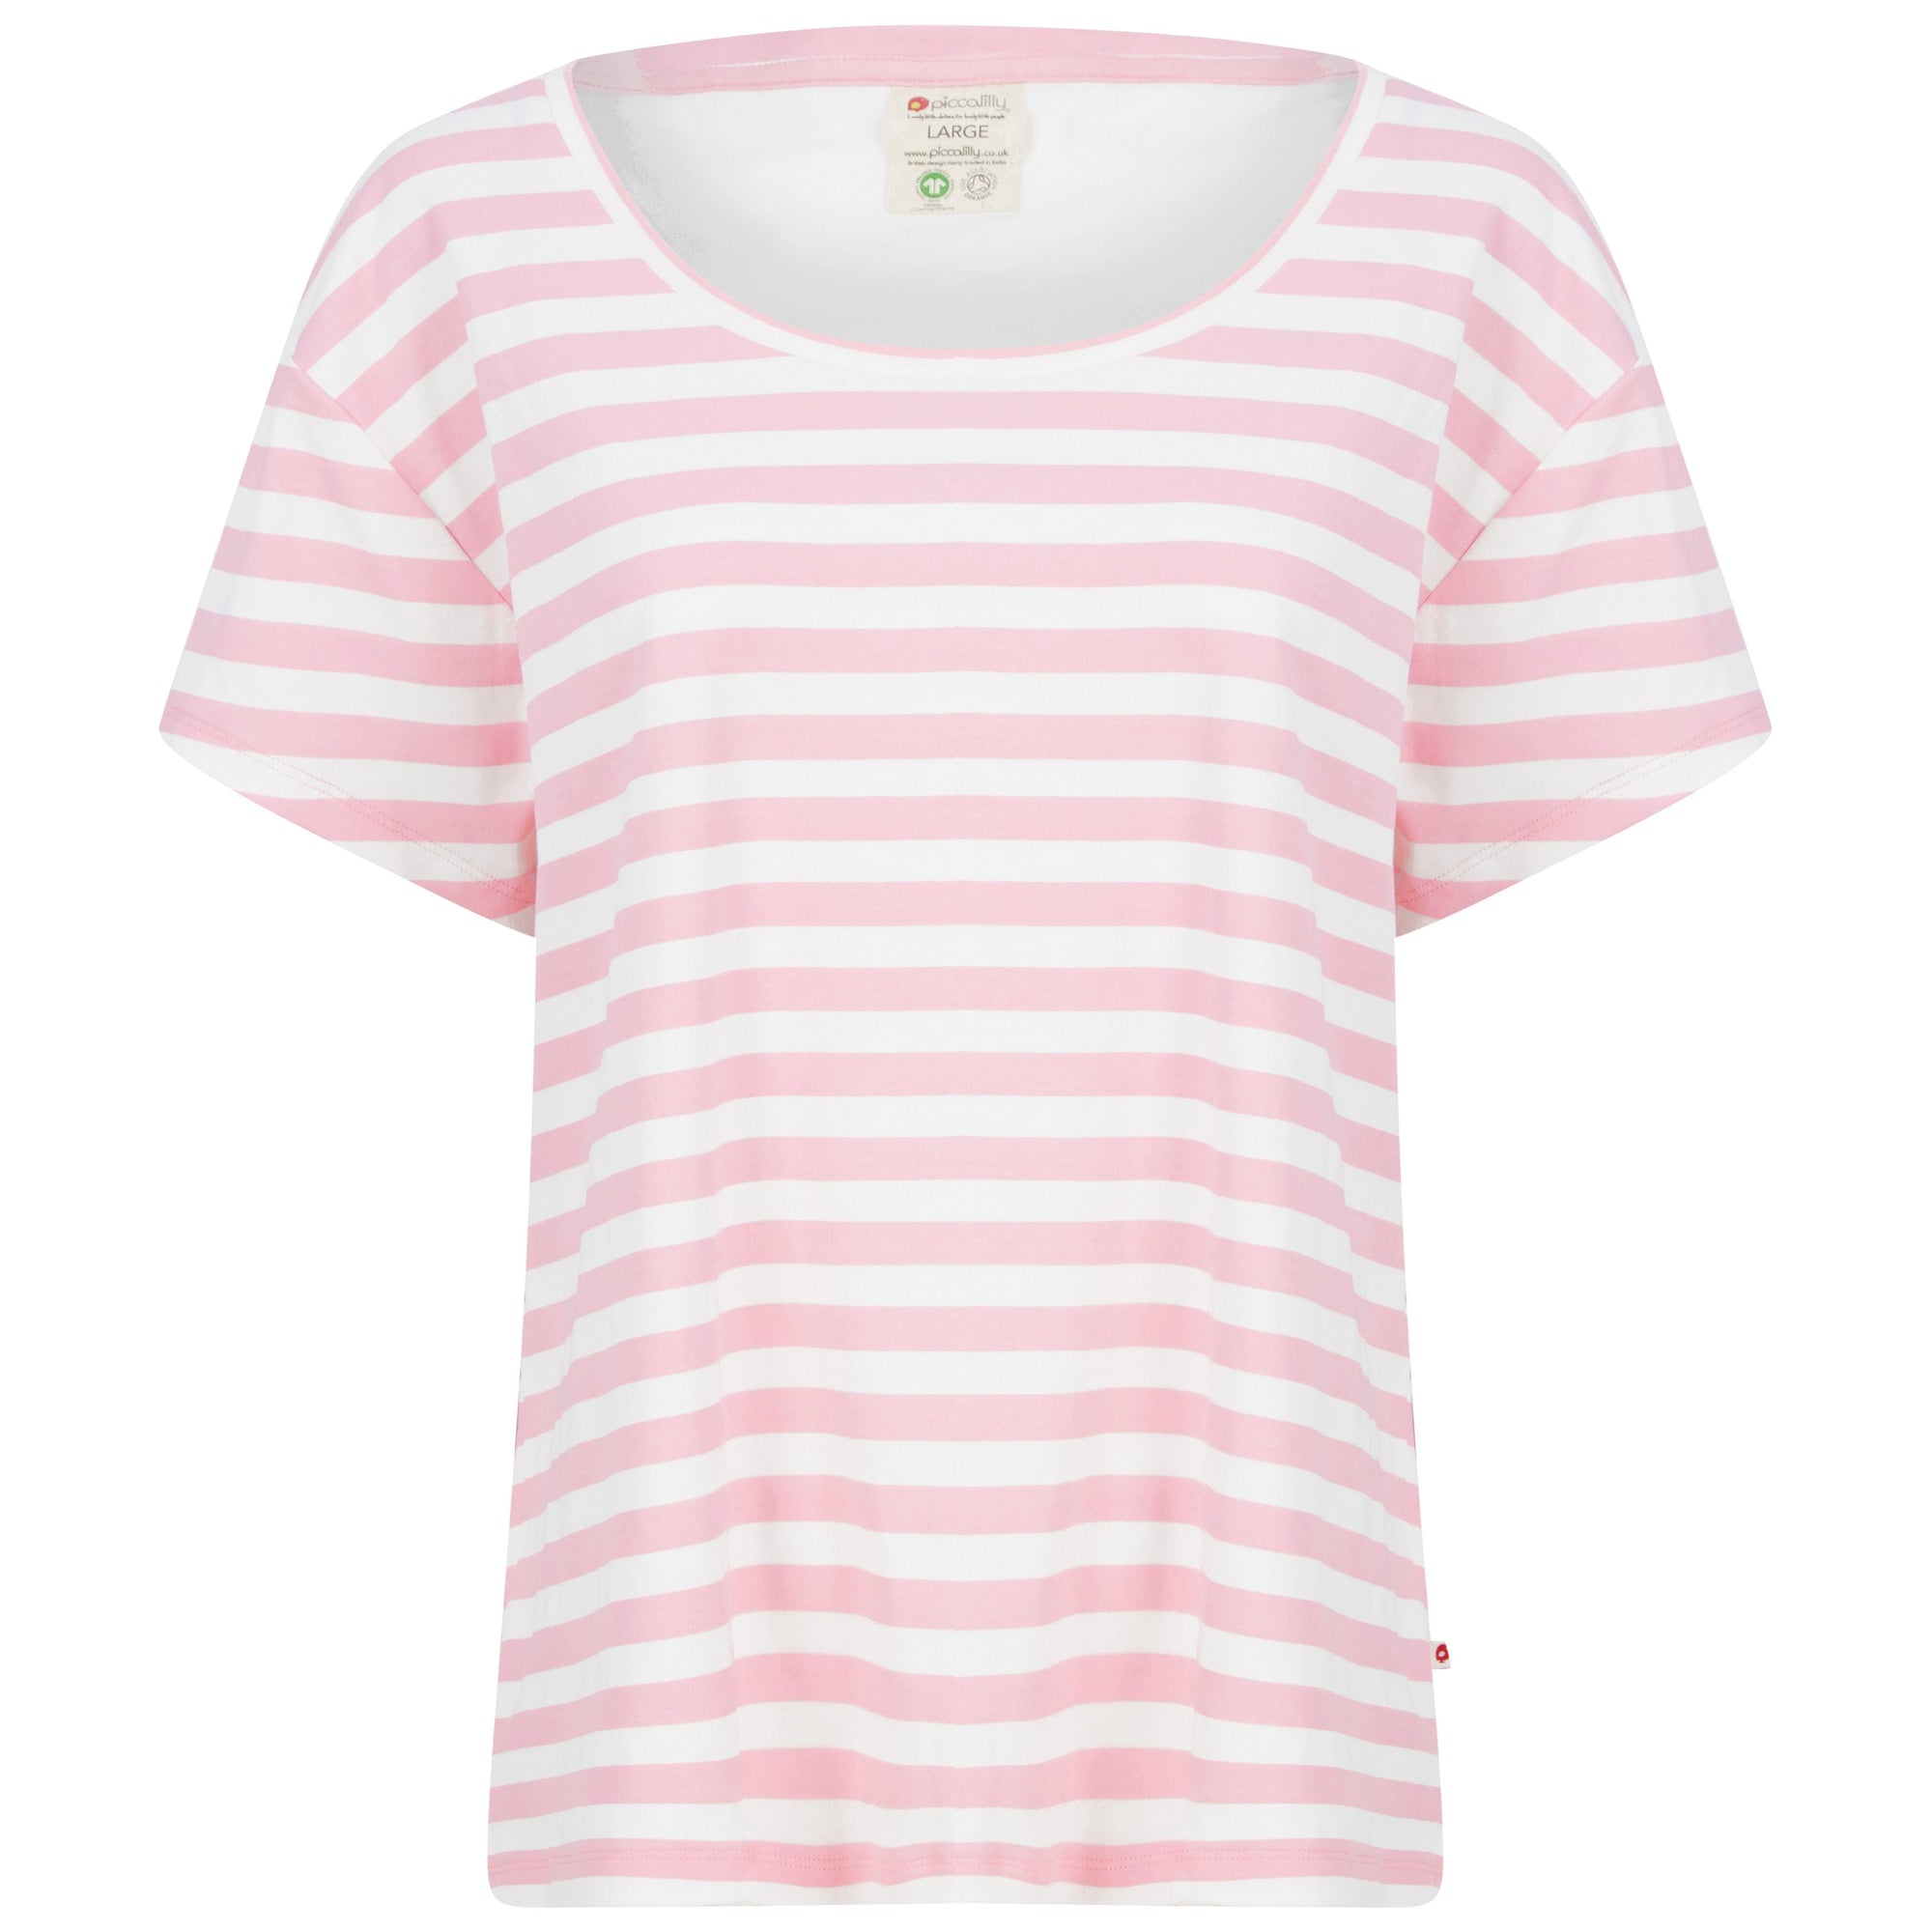 Adult's Orchard Pink T-Shirt - 1 Left Size UK S-Piccalilly-Modern Rascals